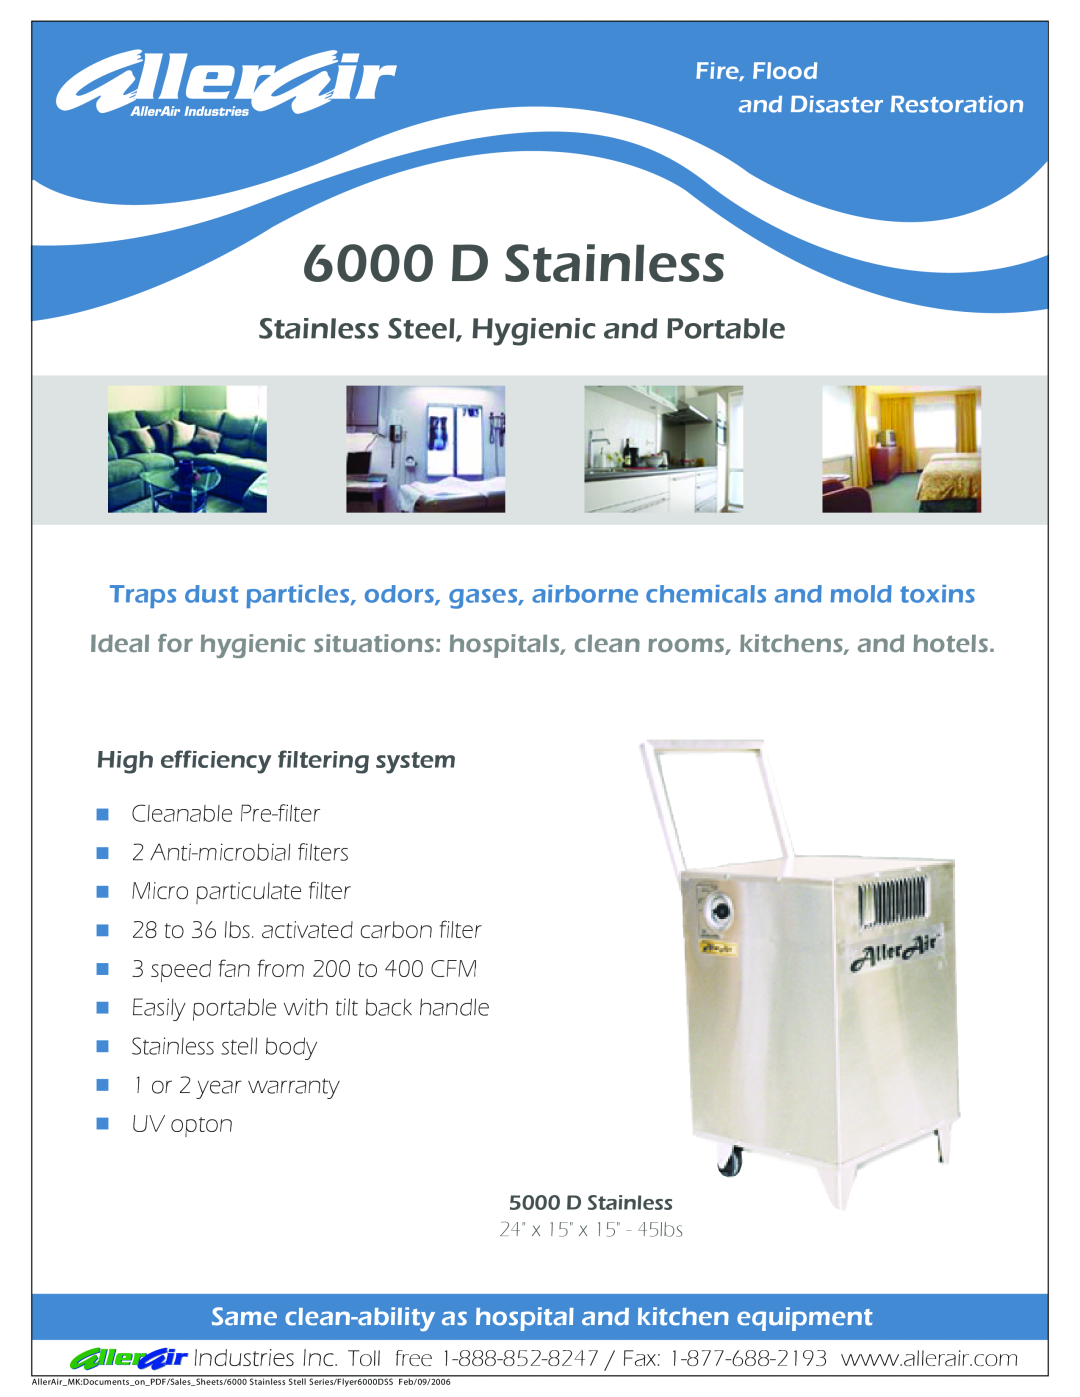 AllerAir 5000 D warranty High efficiency filtering system, D Stainless, Stainless Steel, Hygienic and Portable 